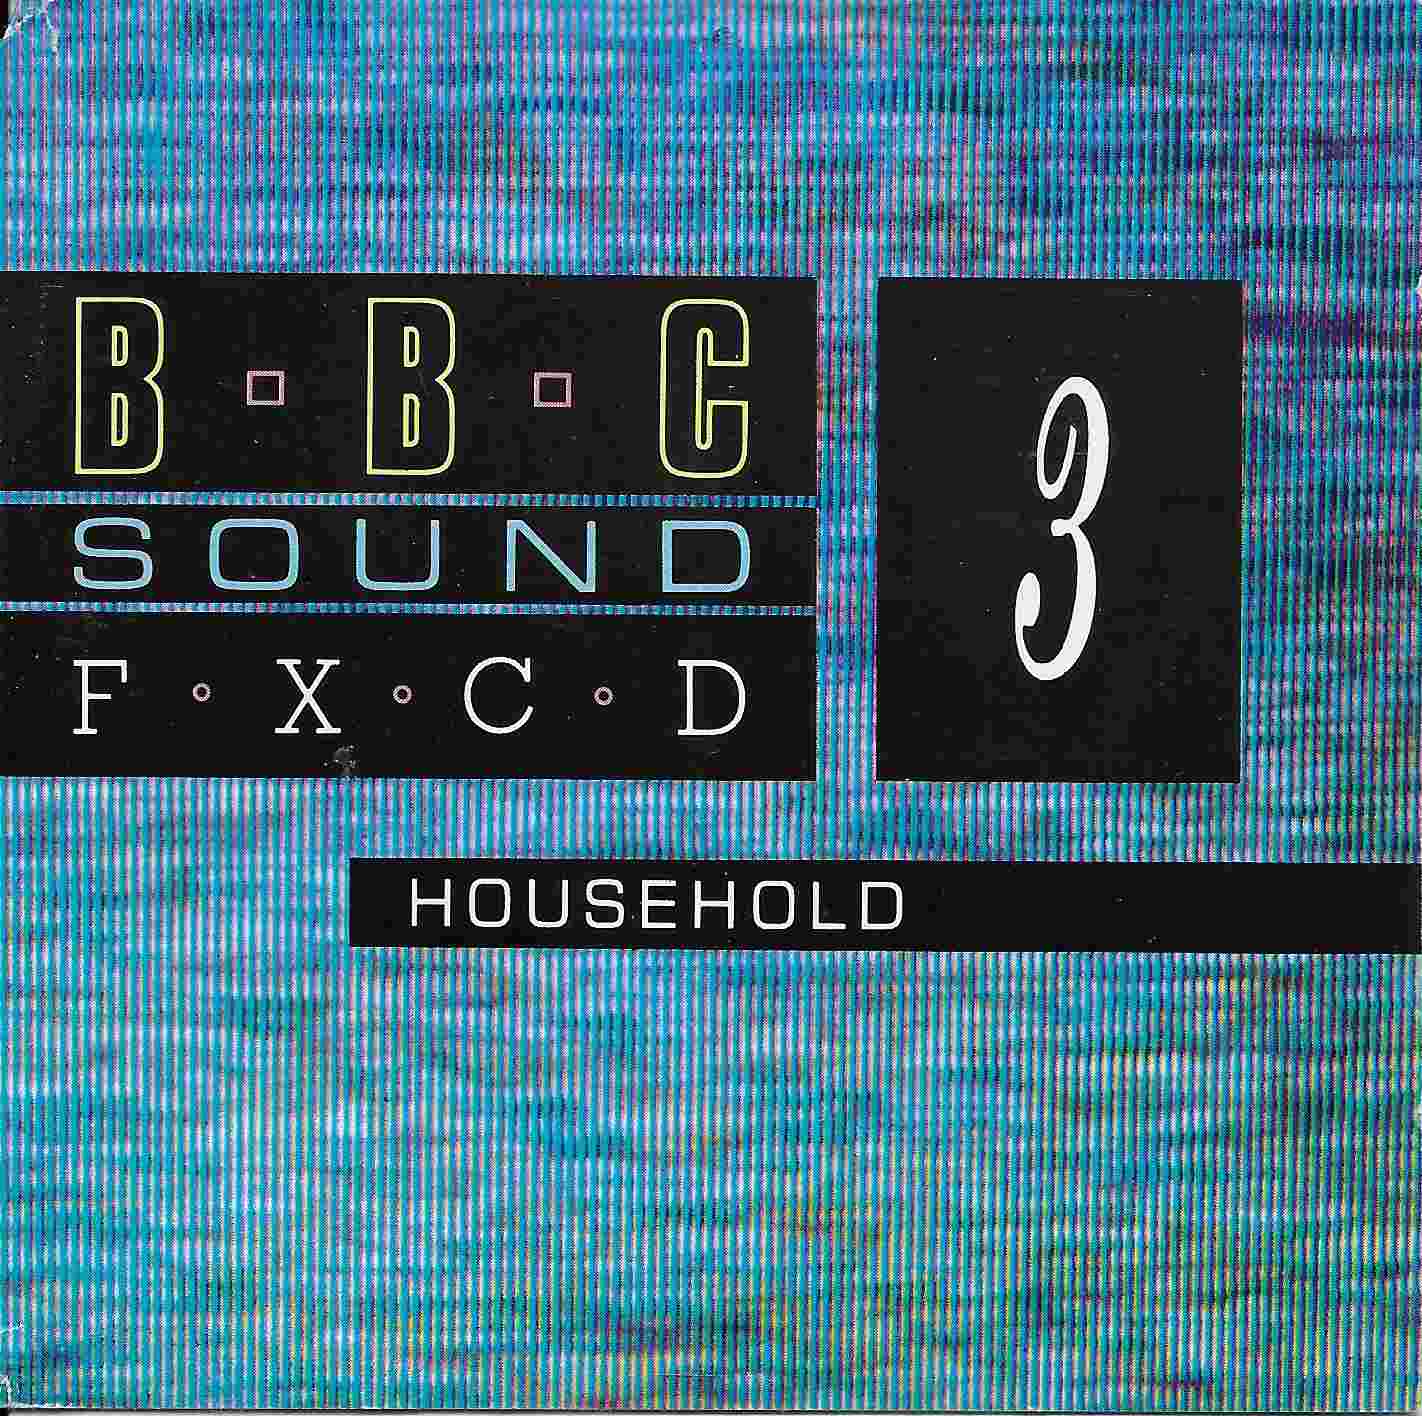 Picture of Household by artist Various from the BBC cds - Records and Tapes library